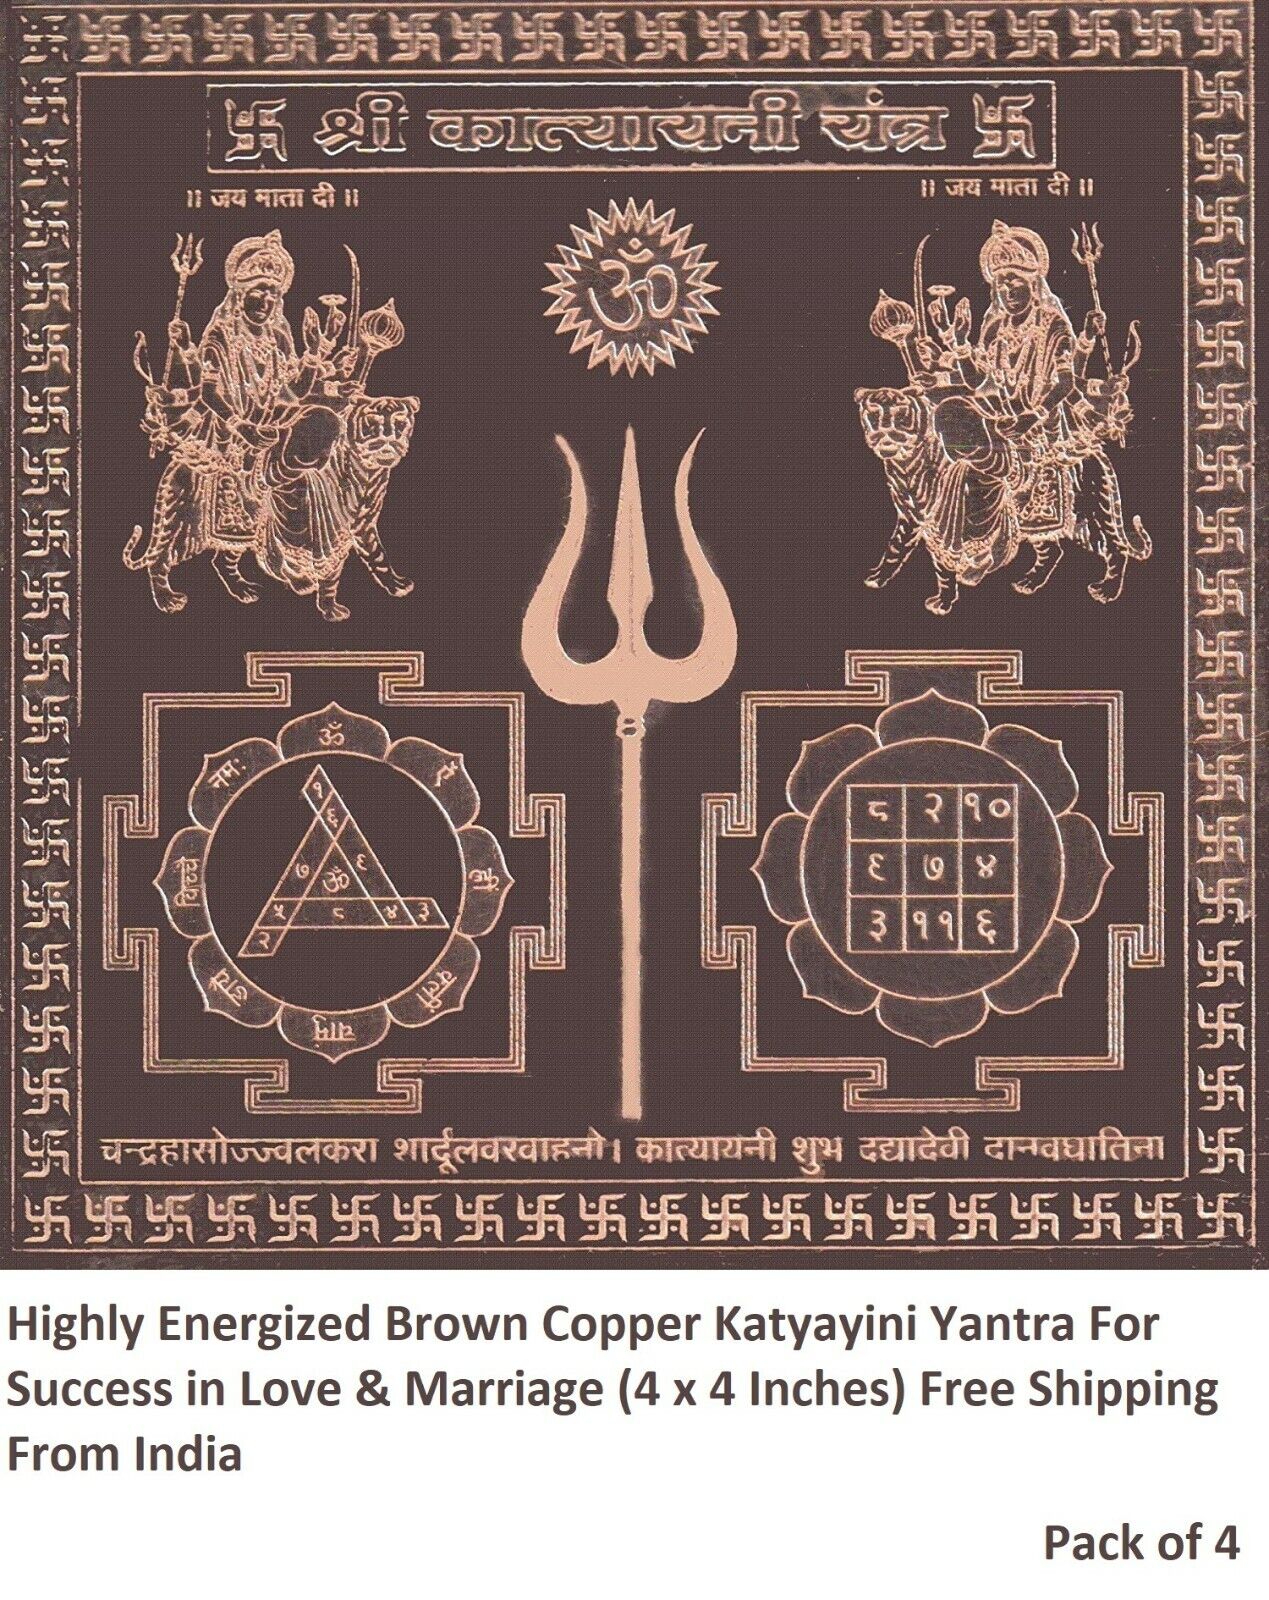 4 x Highly Energized Brown Copper Katyayini Yantra For Successful Marriage